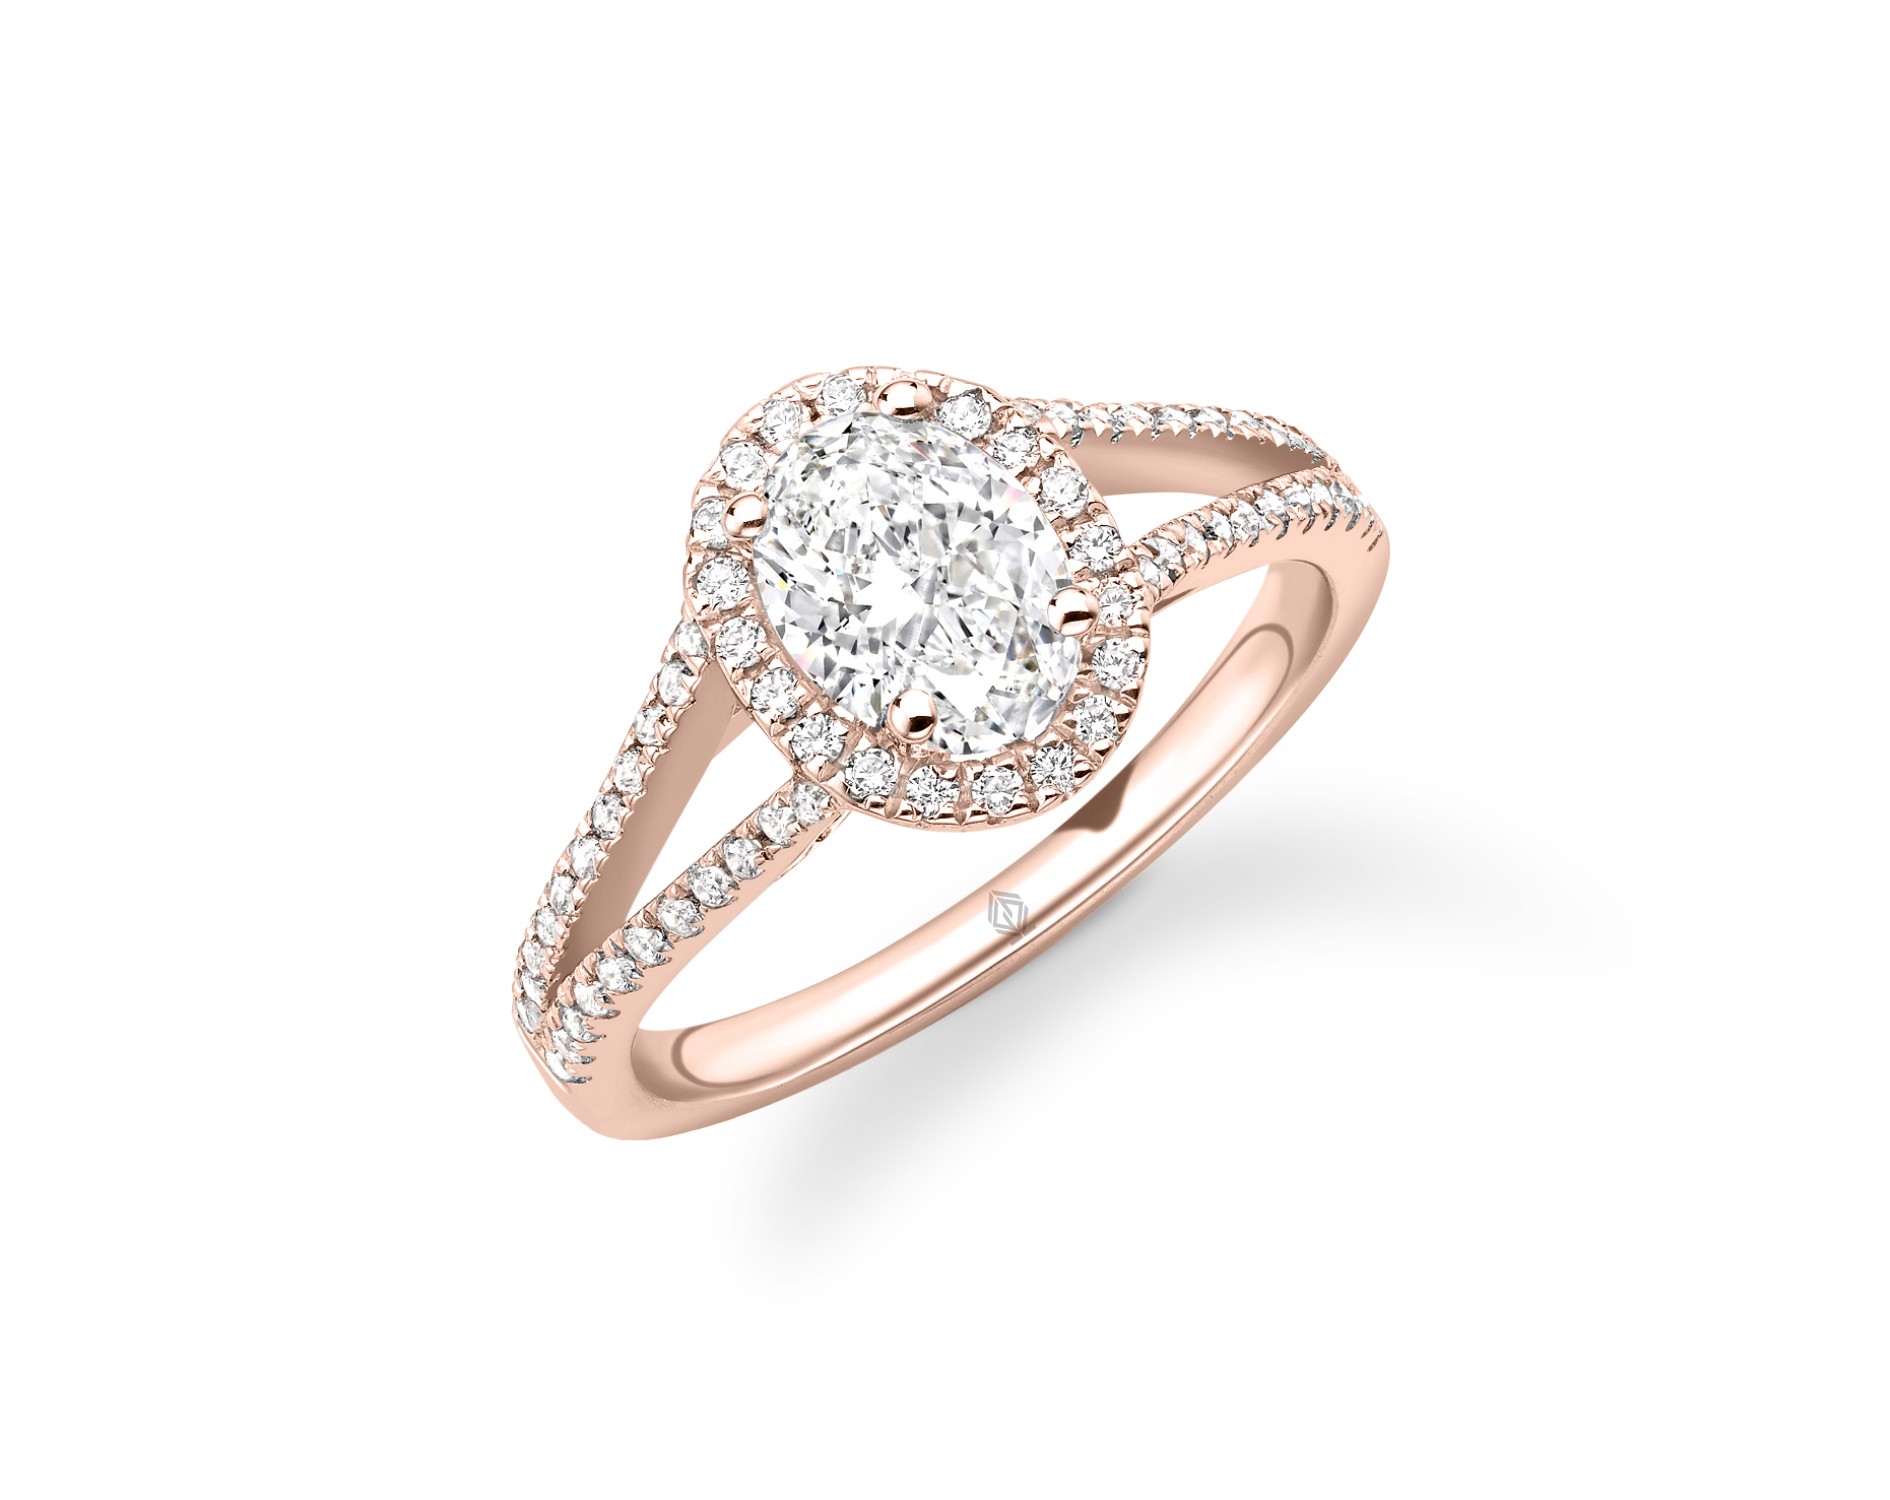 18K ROSE GOLD OVAL CUT HALO DIAMOND ENGAGEMENT RING WITH SPLIT SHANK IN PAVE SET